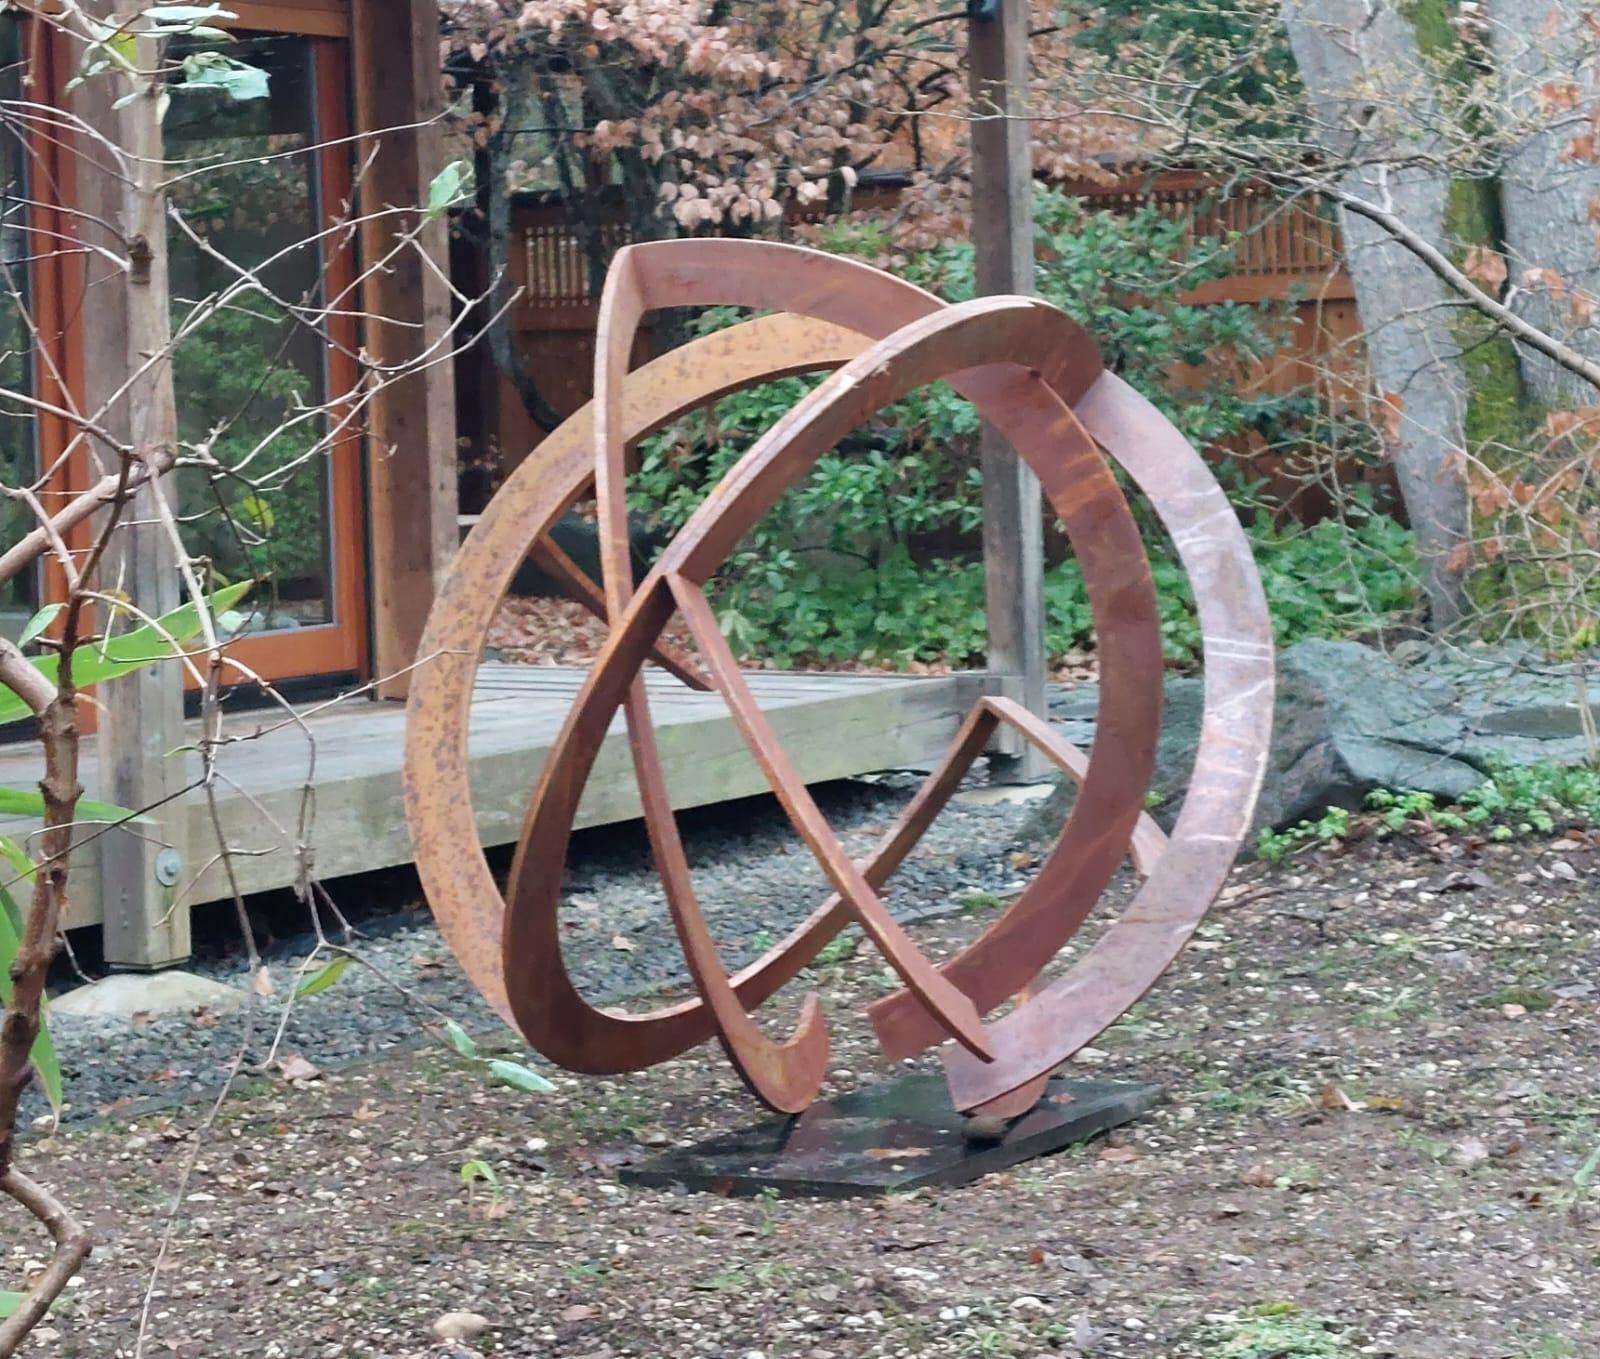 Artist: Kuno Vollet

Title: Orbit

Contemporary rusted steel sculpture for inside or garden outdoor spaces.

Beautiful circle - sign for infinity. Stunning large artwork. Possible to put on a pedestal or directly on to the ground.
This artwork takes